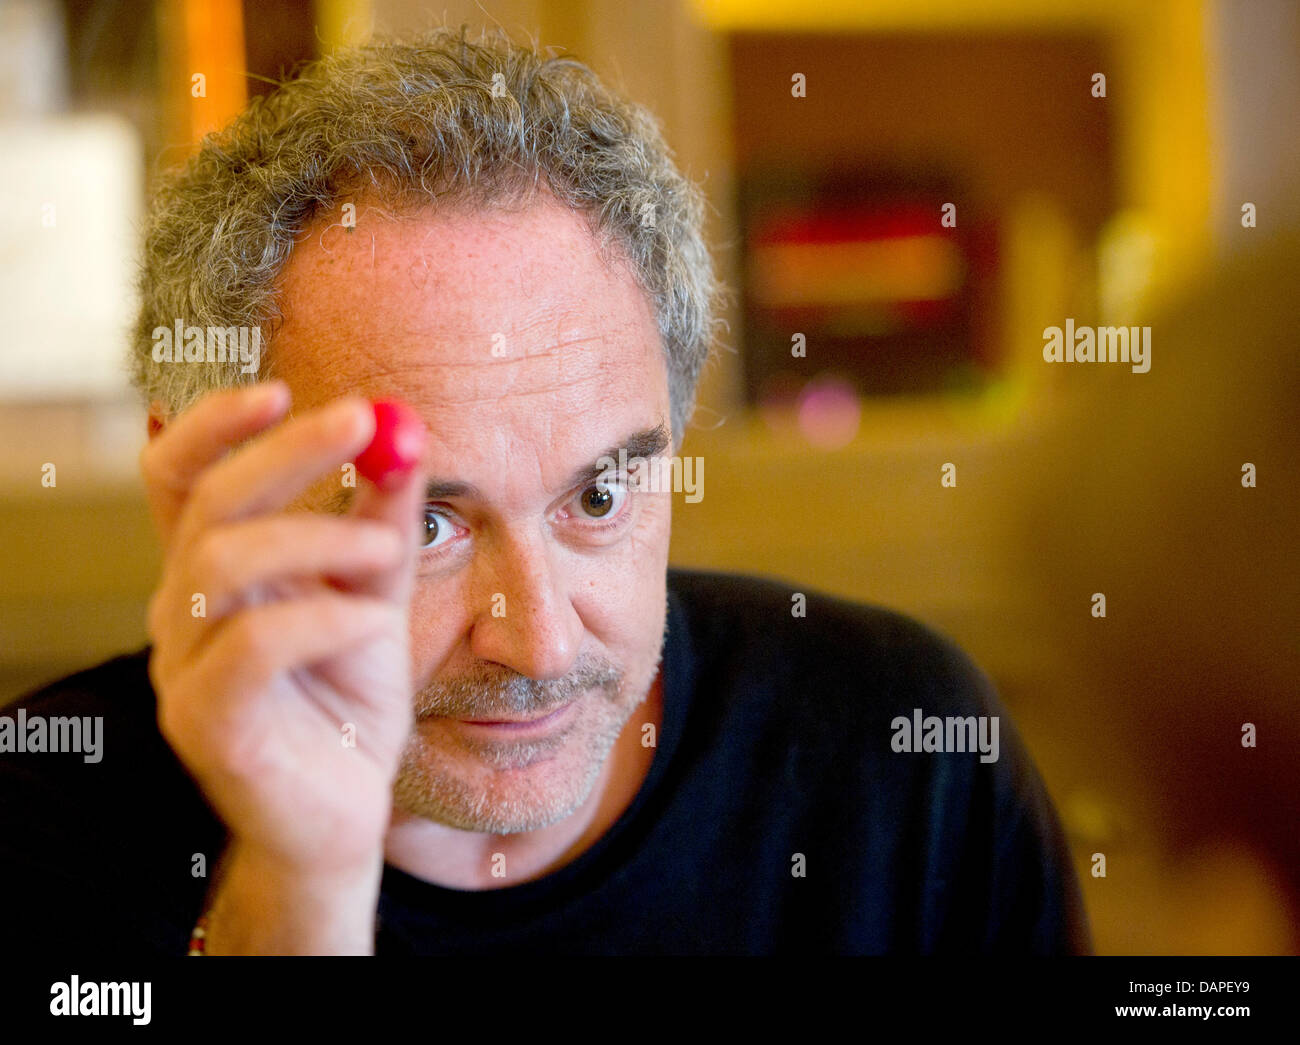 Spanish 3-star chef Ferran Adria speaks at a restaurant during a meeting of top chefs in Munich, Germany, 16 August 2011. The meeting is taking place on the occassion of the presentation of the documentary film 'El Bulli - Cooking In Progress', which appears in German cinemas on 15 September 2011. Photo: PETER KNEFFEL Stock Photo